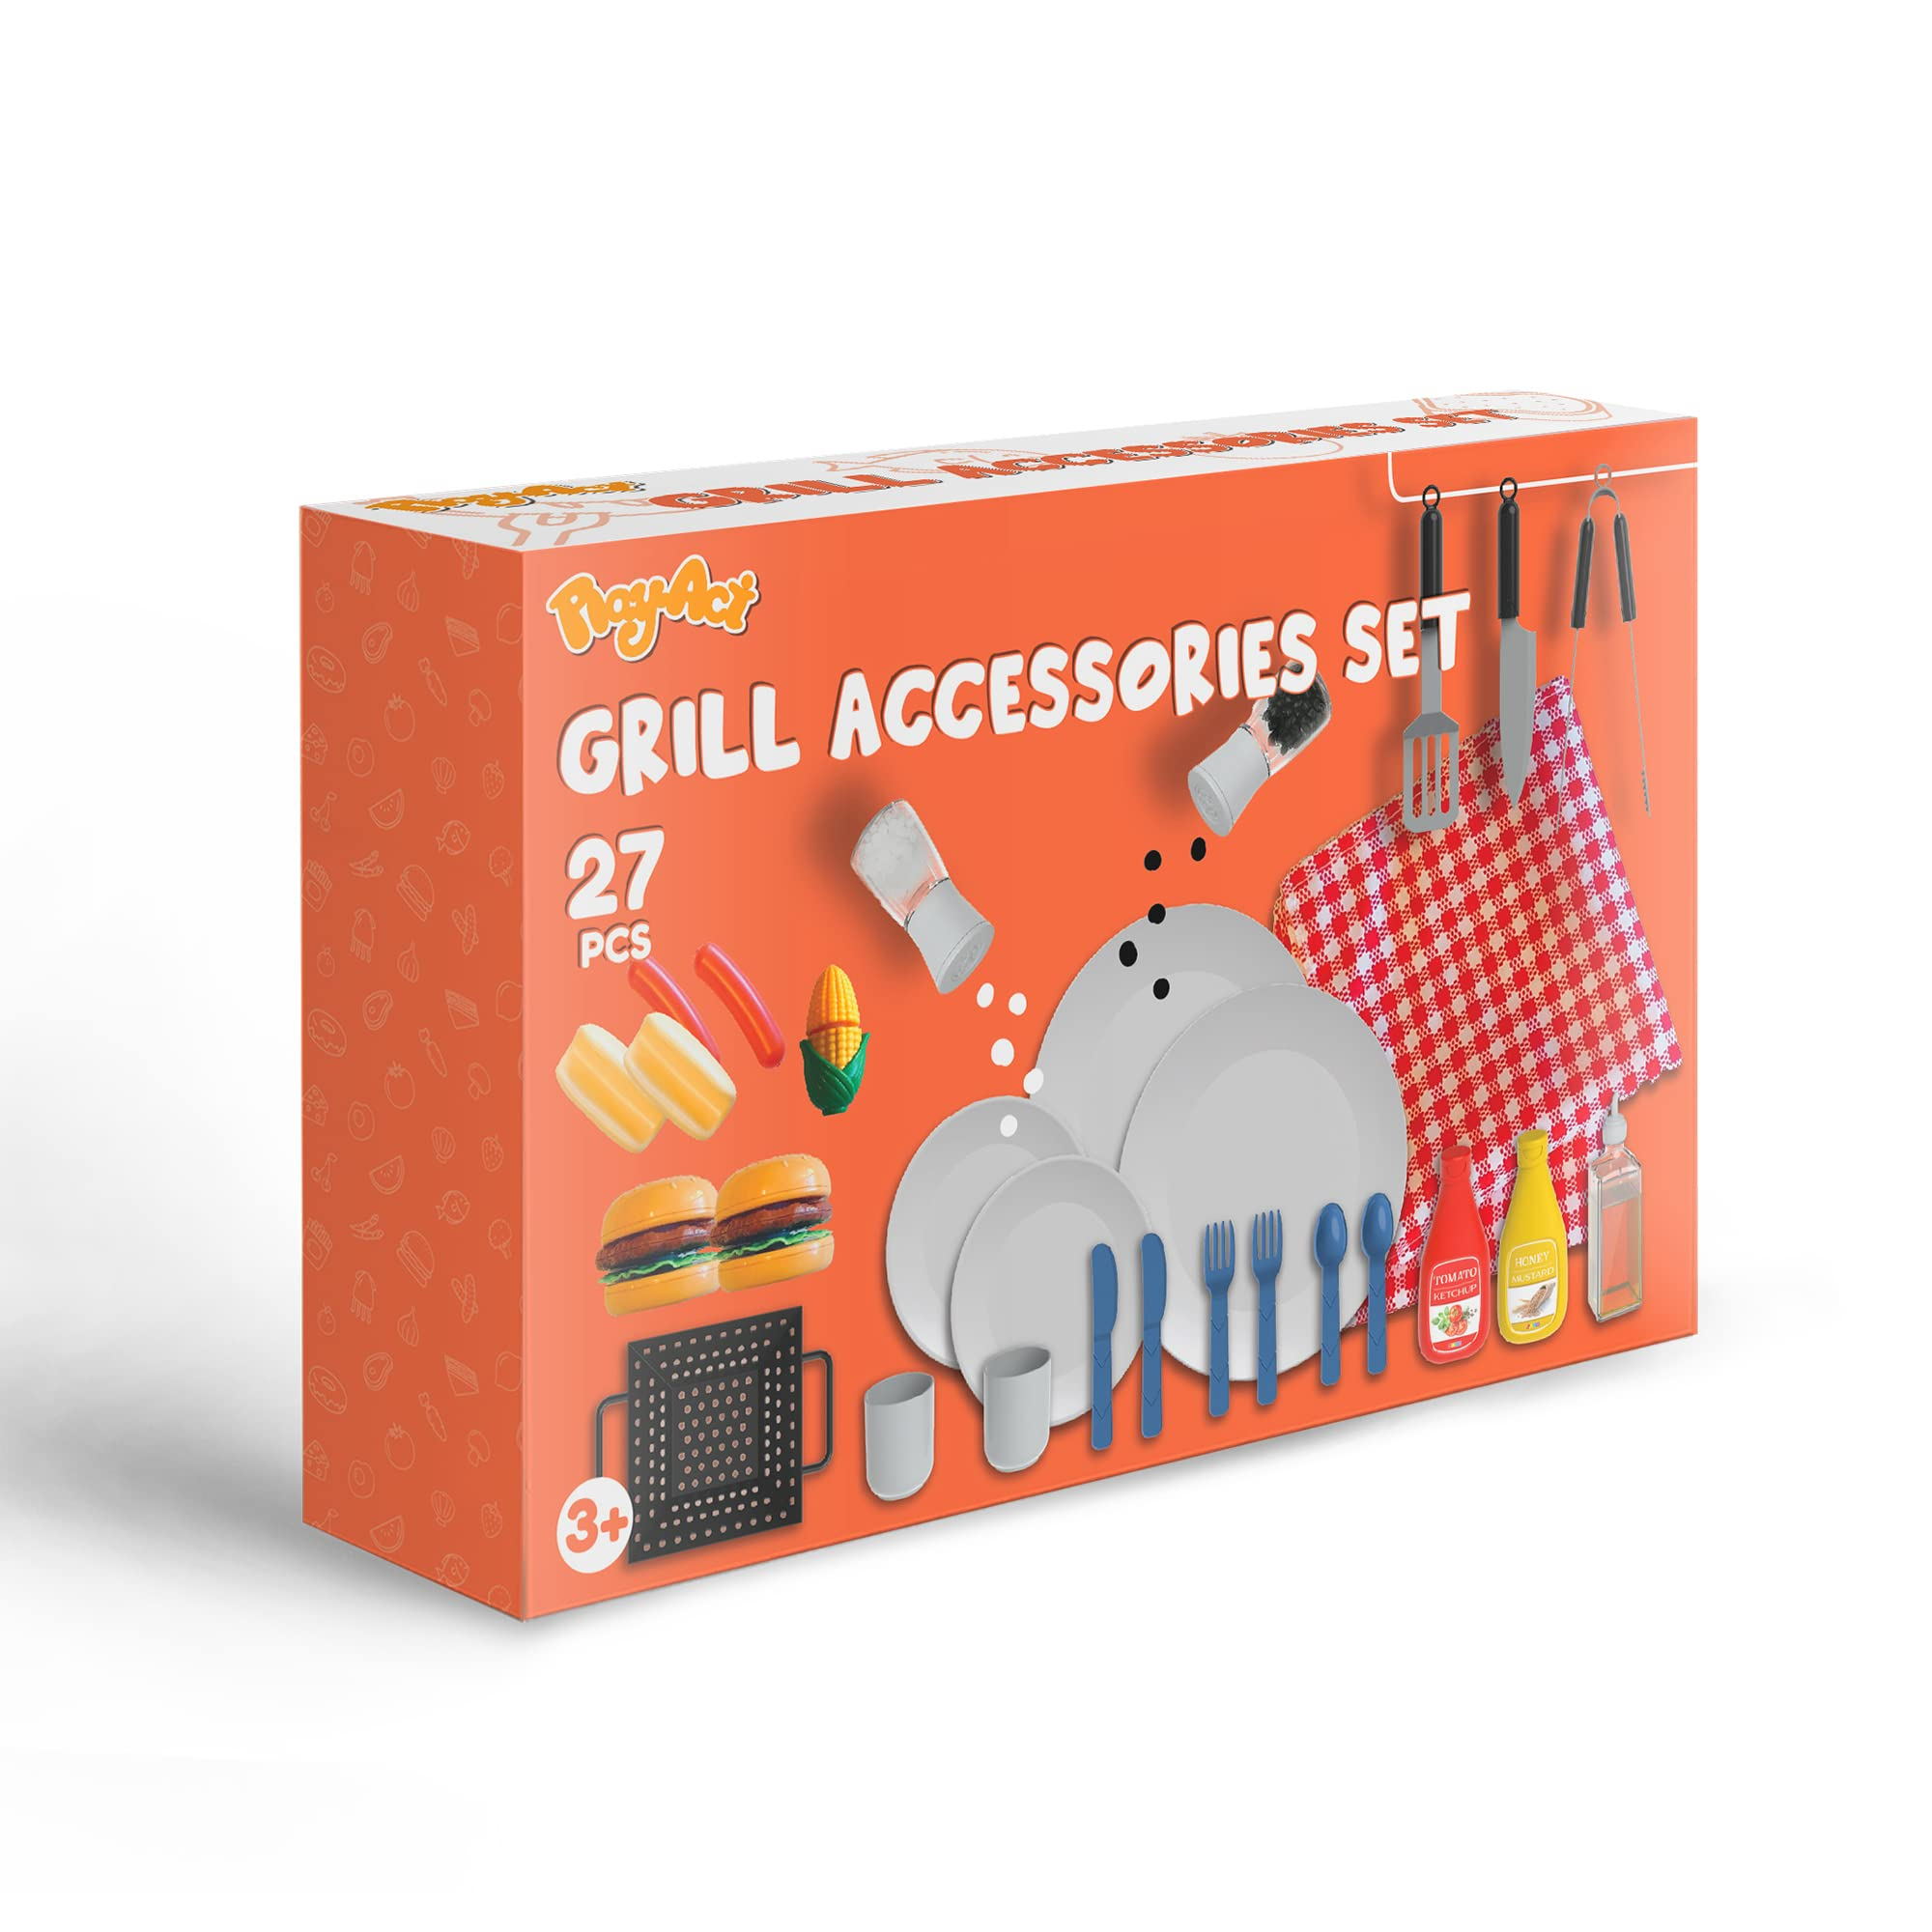 Barbecue Food and Accessories Toy Set